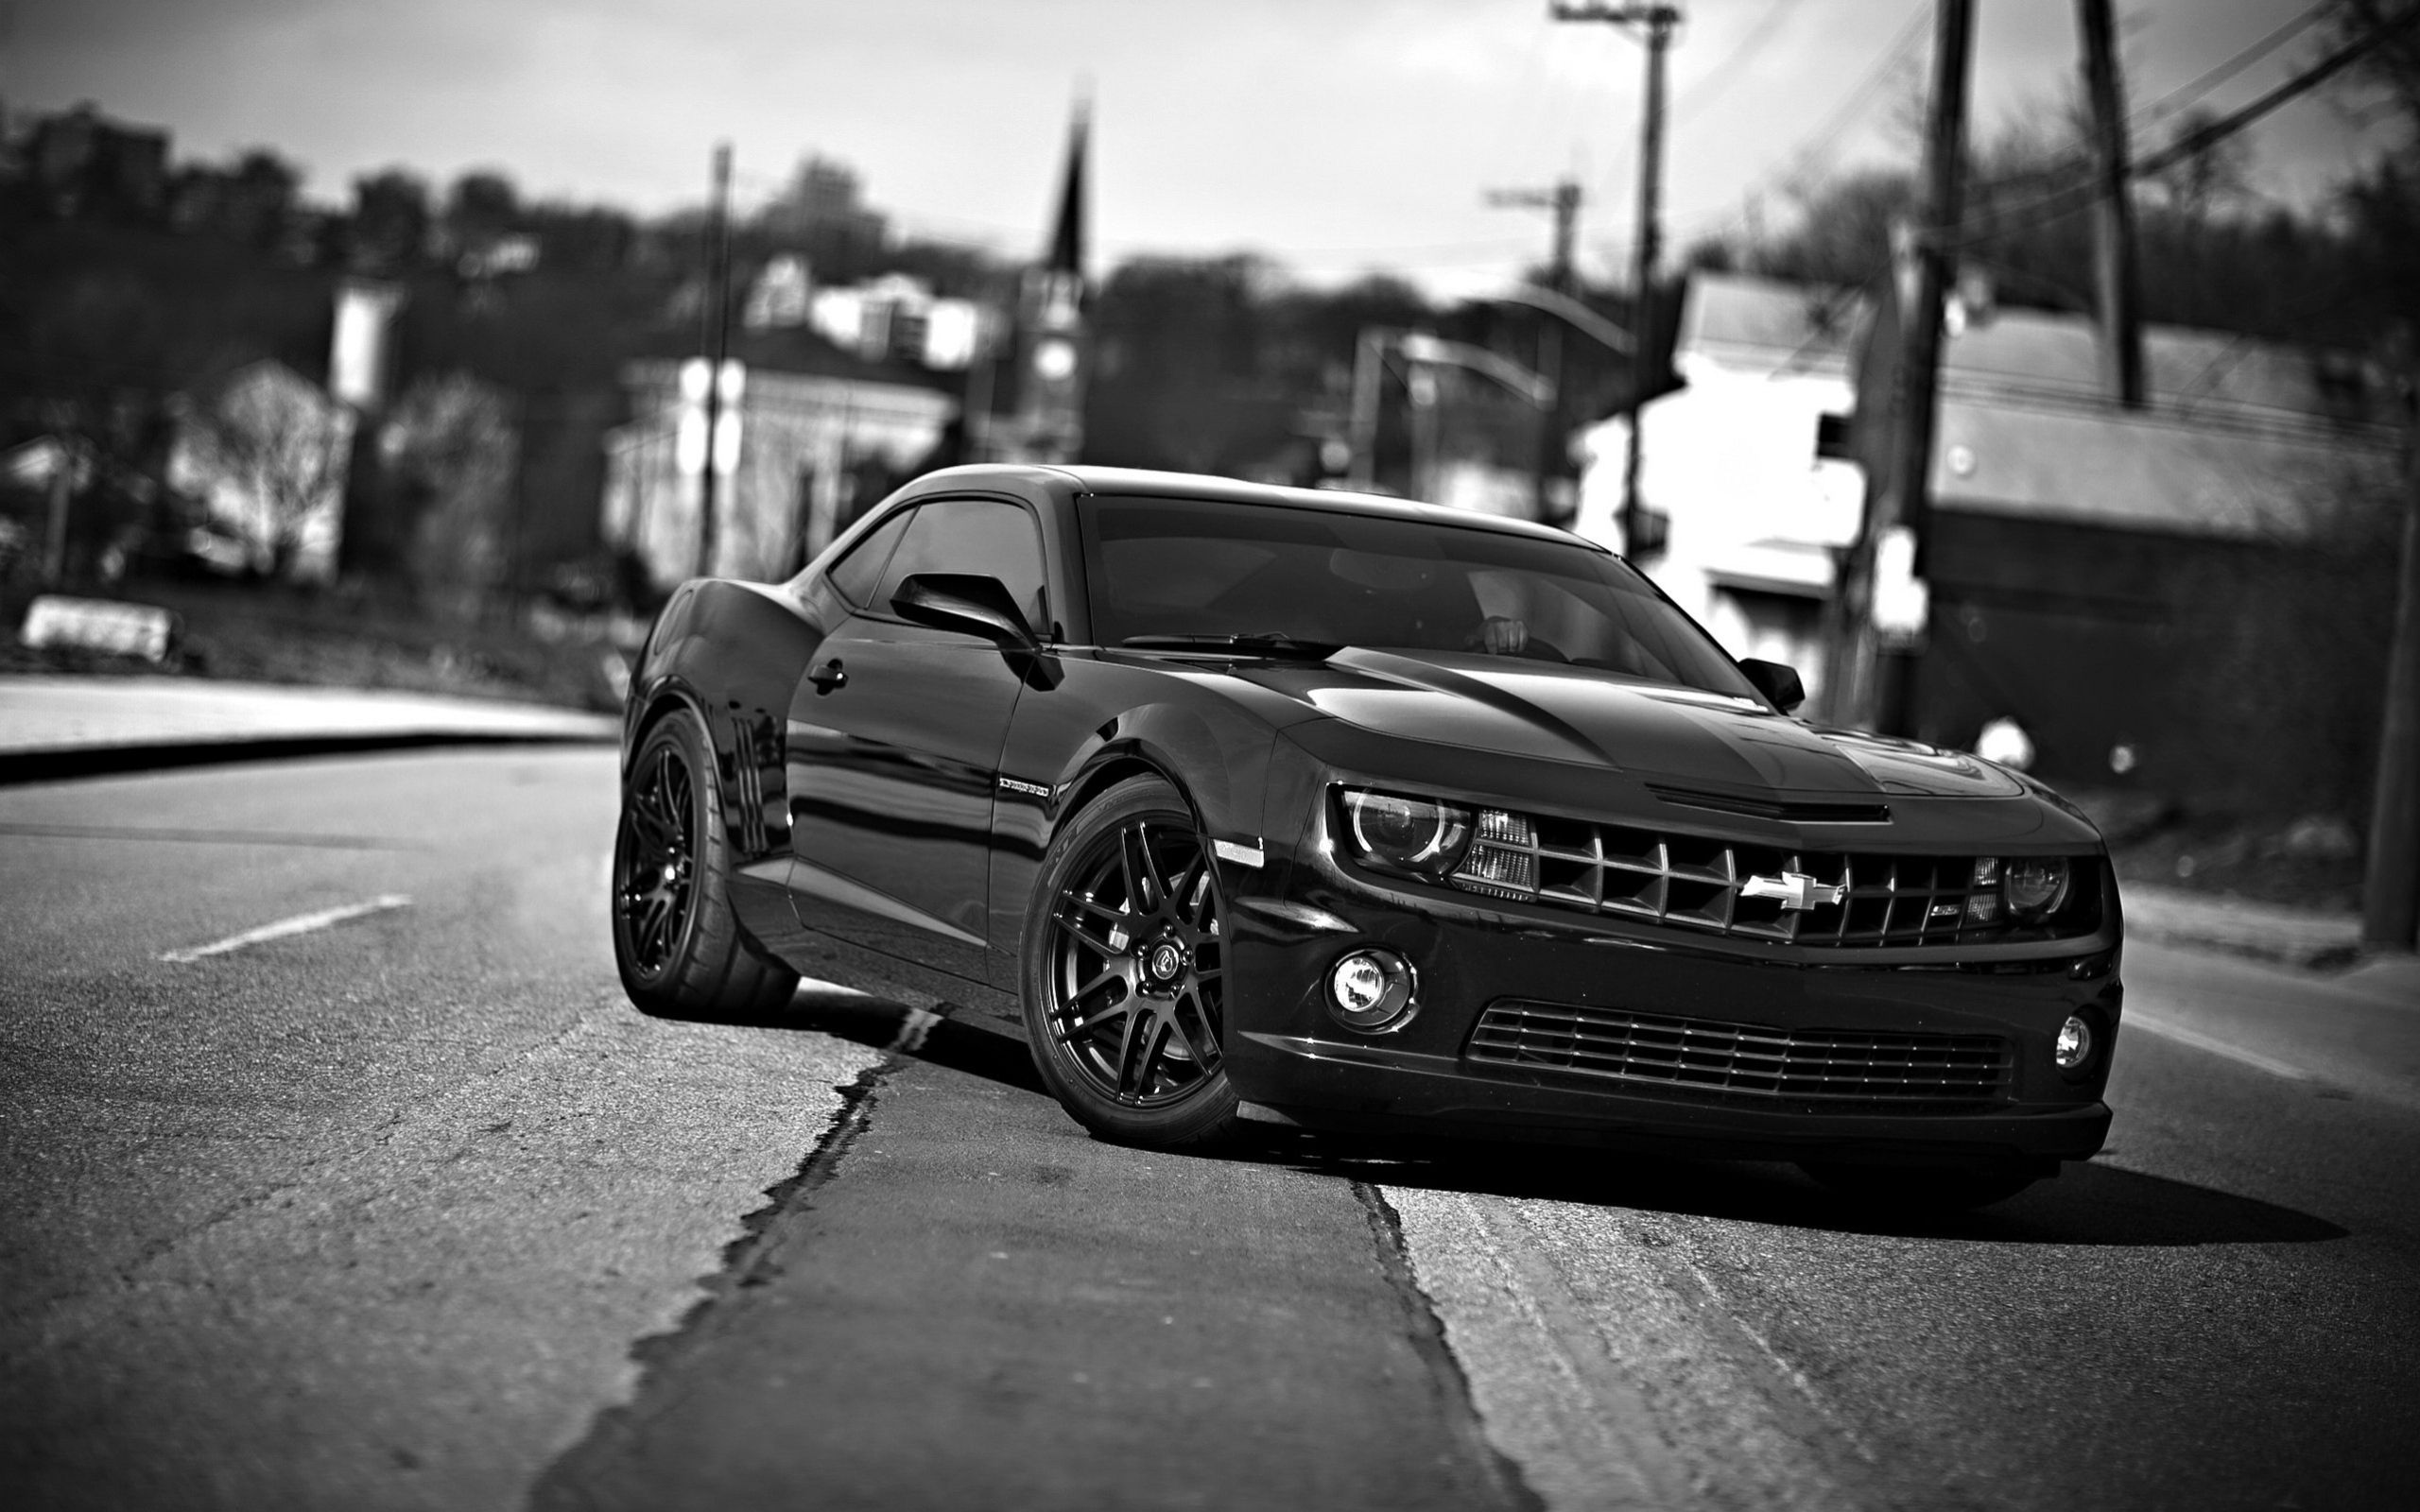 auto, chevrolet camaro, chevrolet, cars, front view, bw, chb 1080p